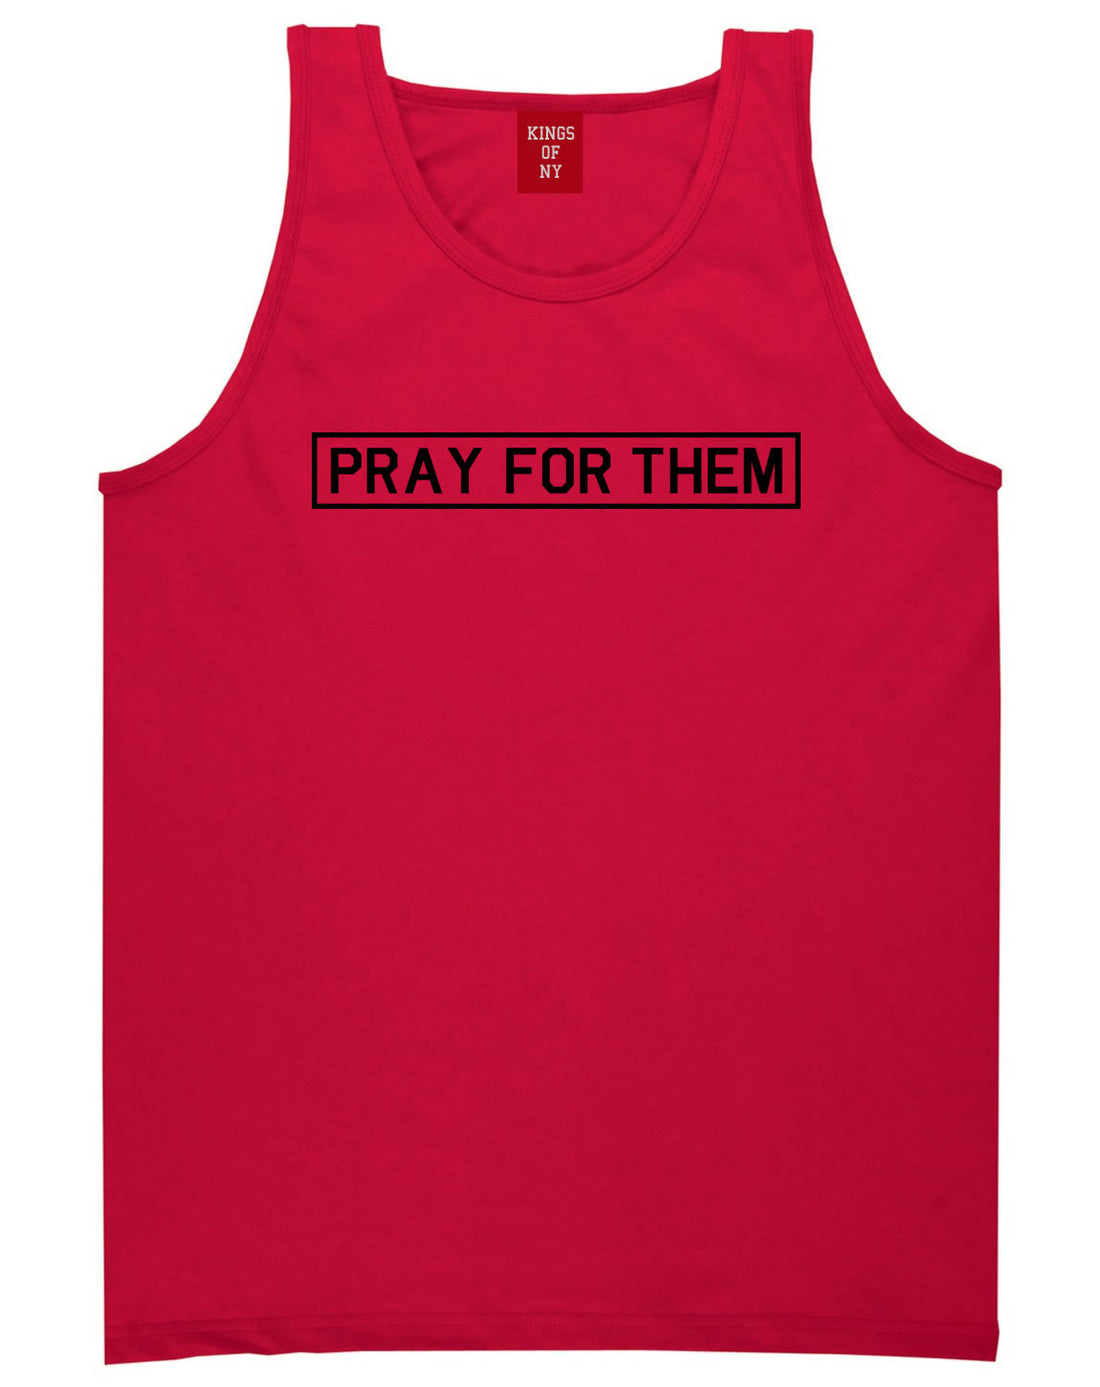 Pray For Them Fall15 Tank Top in Red by Kings Of NY